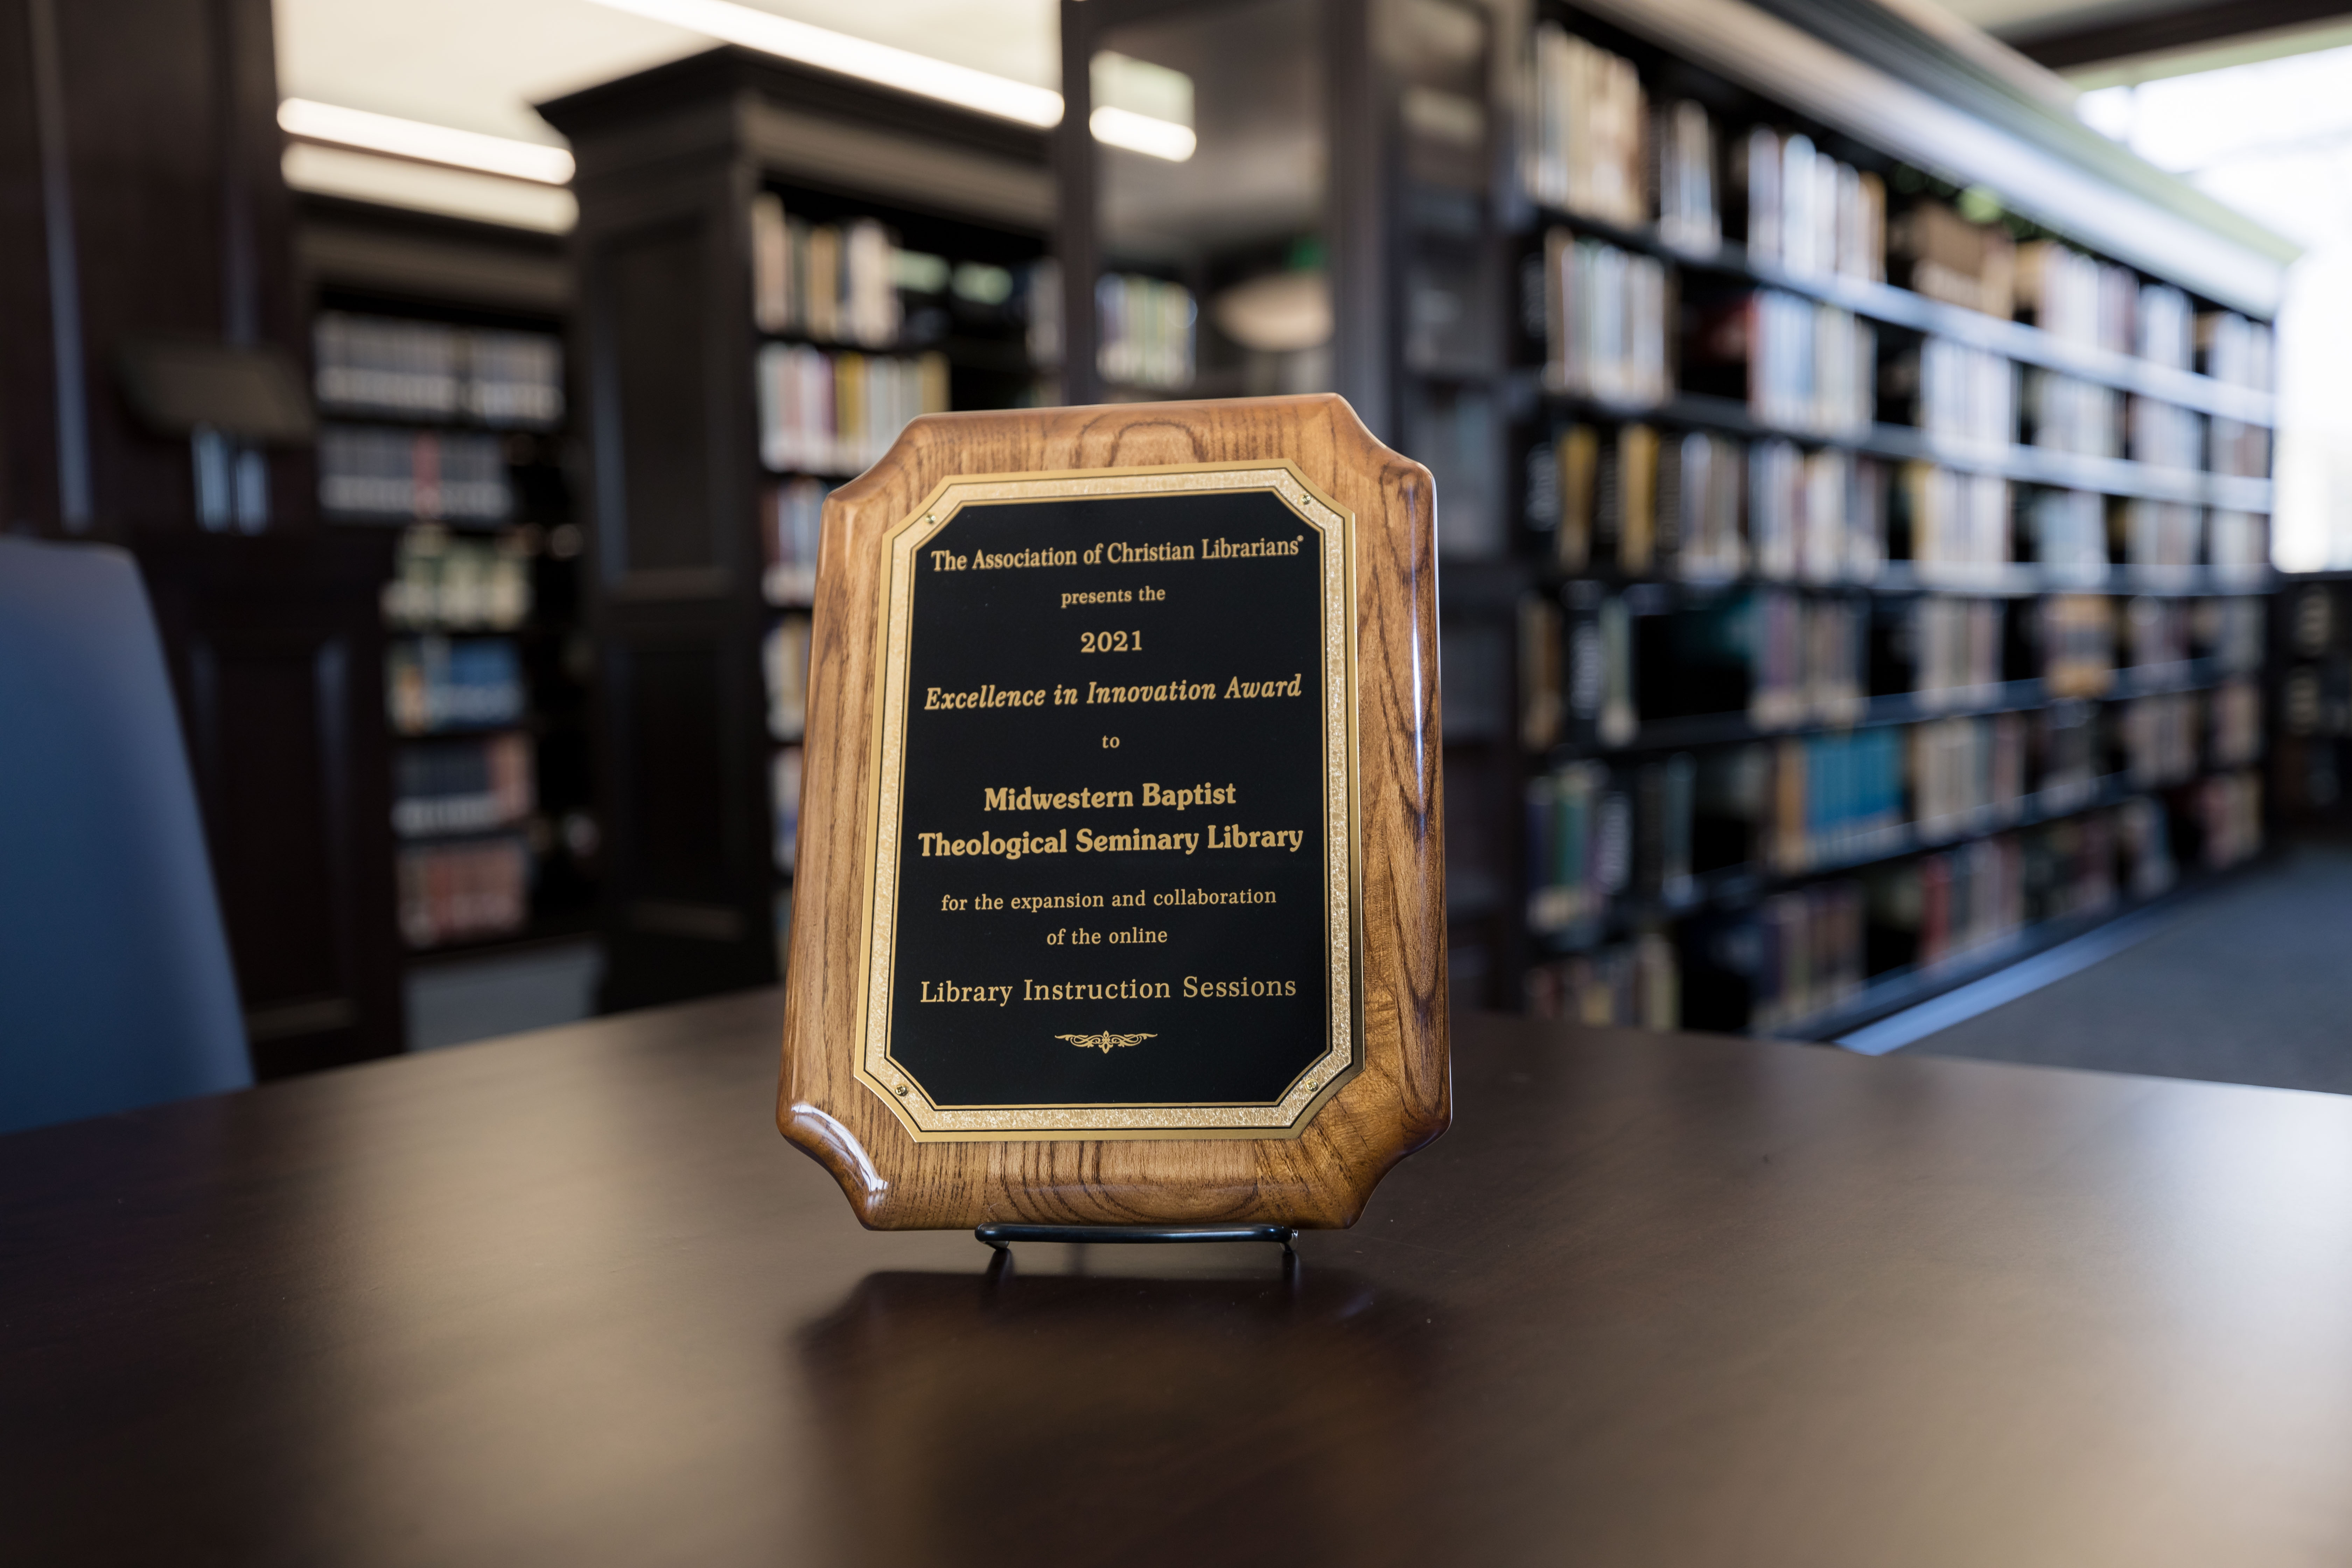 MBTS Library Wins ACL Award for Excellence in Innovation